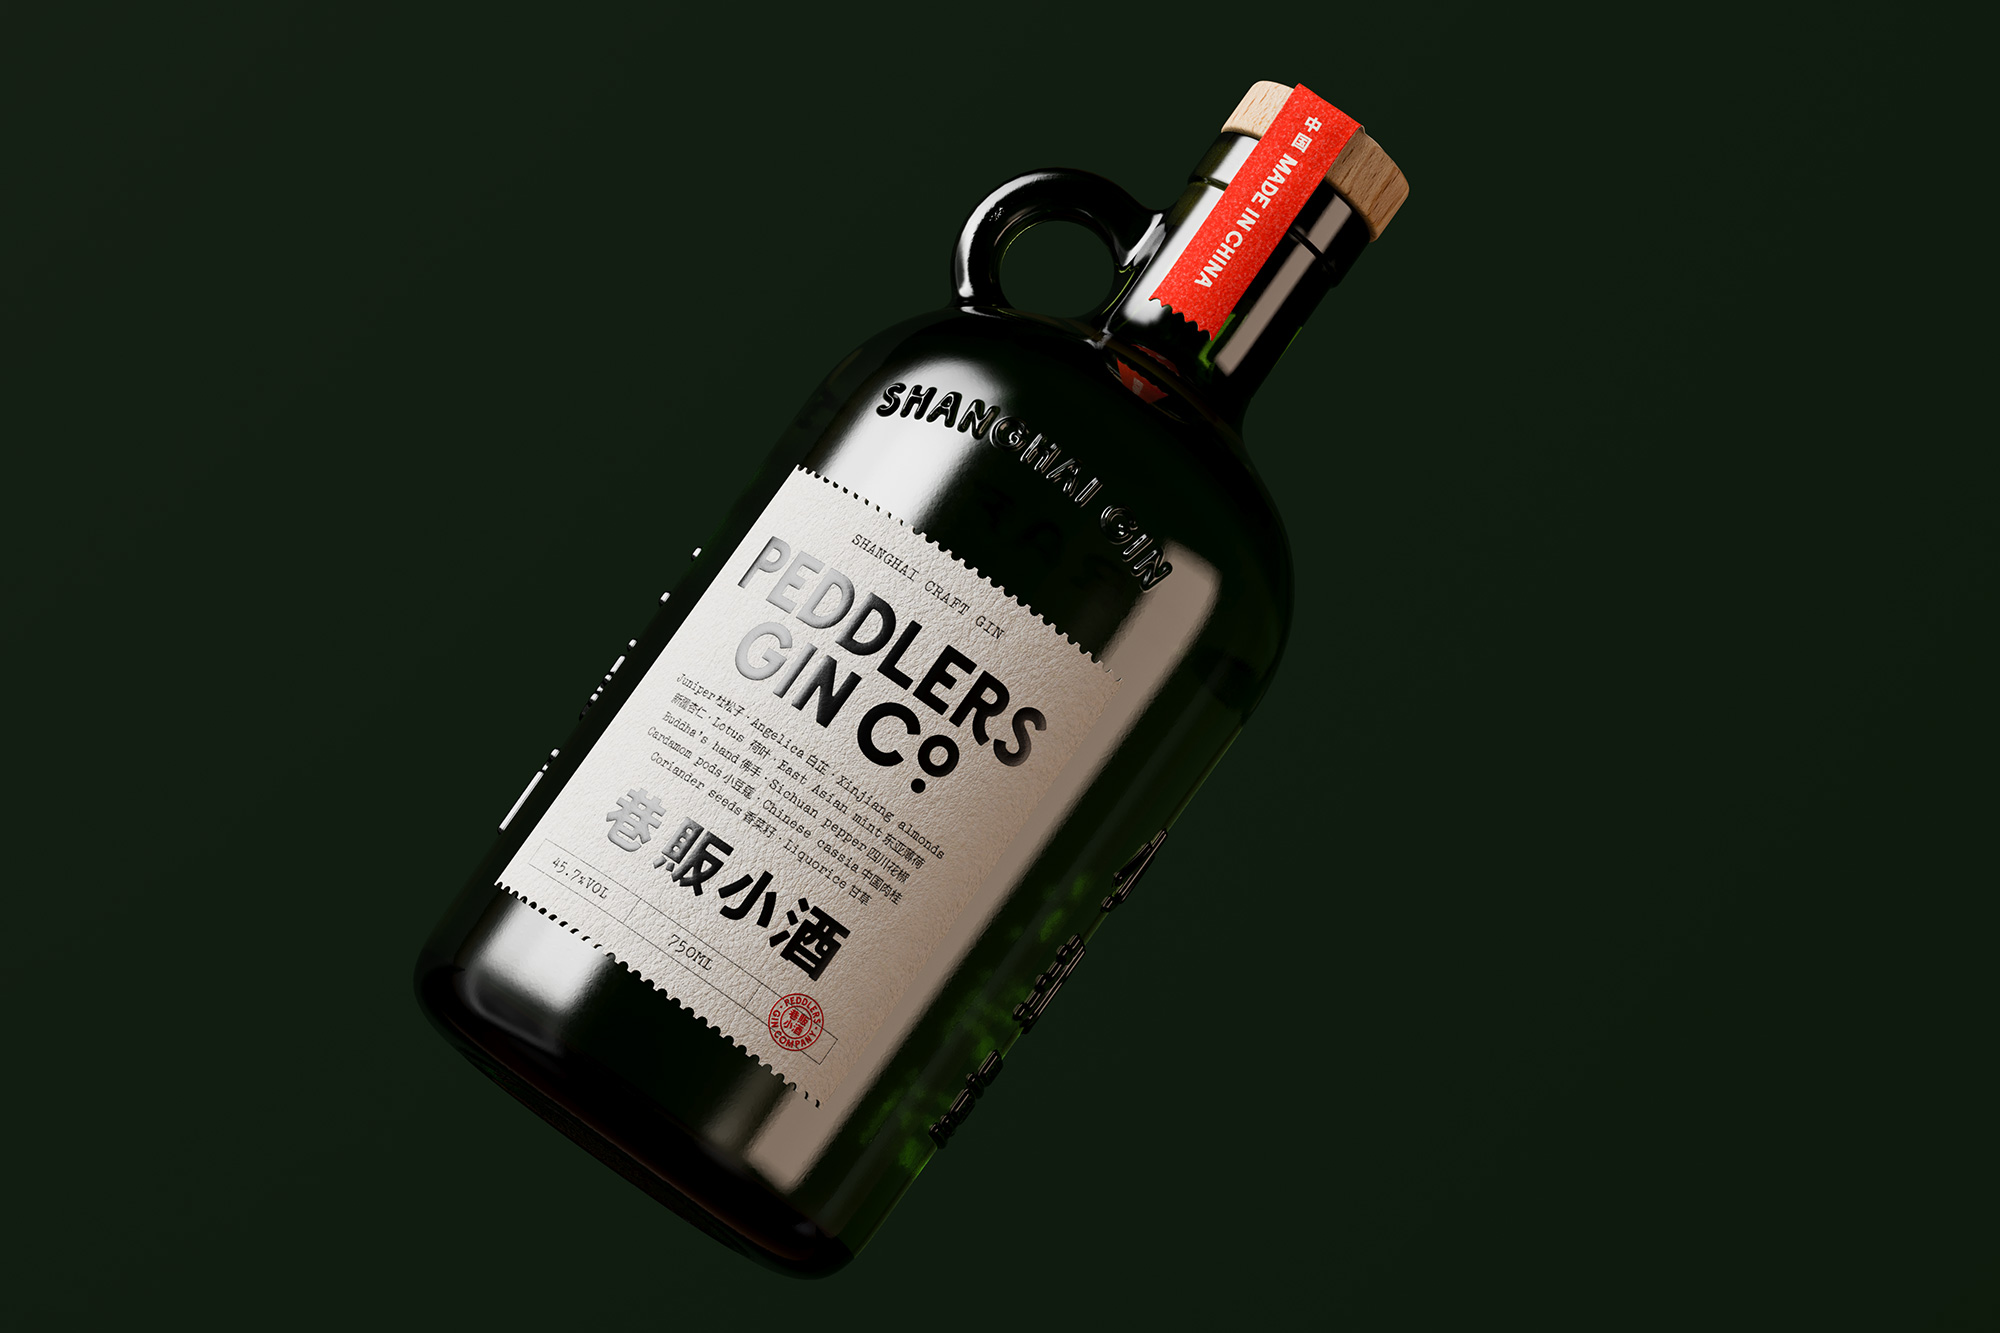 Peddlers Gin Co Brand and Packaging Designed by OMSE